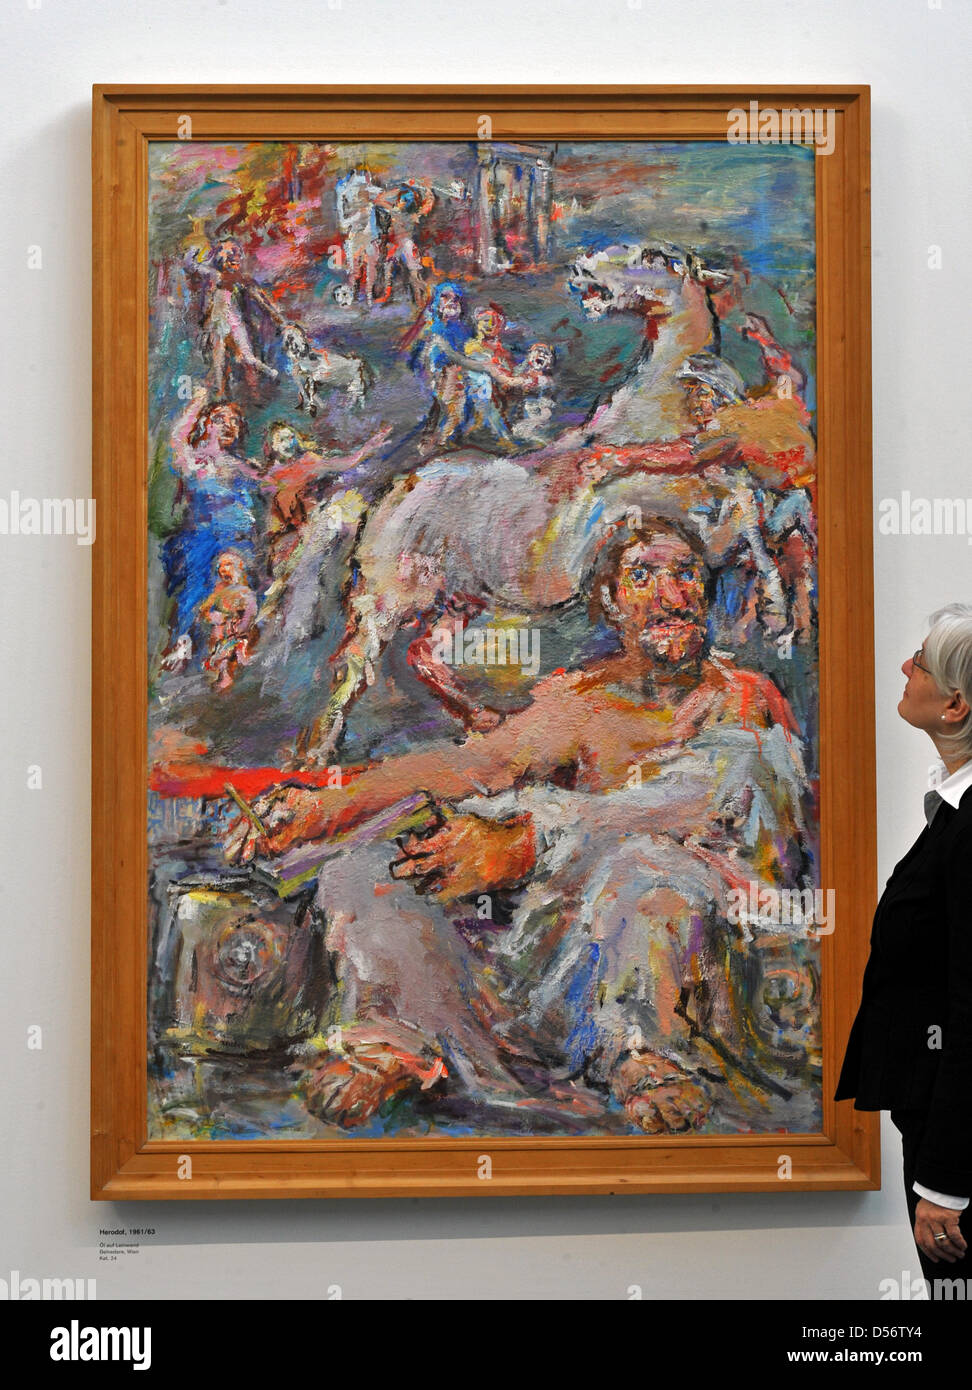 A man eyes the work 'Herodotus' (1960-63) by Austrian artist Oskar Kokoschka (1886-1980) at Moritzburg Museum in Halle Saale, Germany, 26 March 2010. The exhibition 'Oskar Kokoschka's Ancient World. An European Vision of the Modern' themes the Austrian expresionist's late work that intensively deals with the Ancient Greek culture. Photo: HENDRIK SCHMIDT Stock Photo